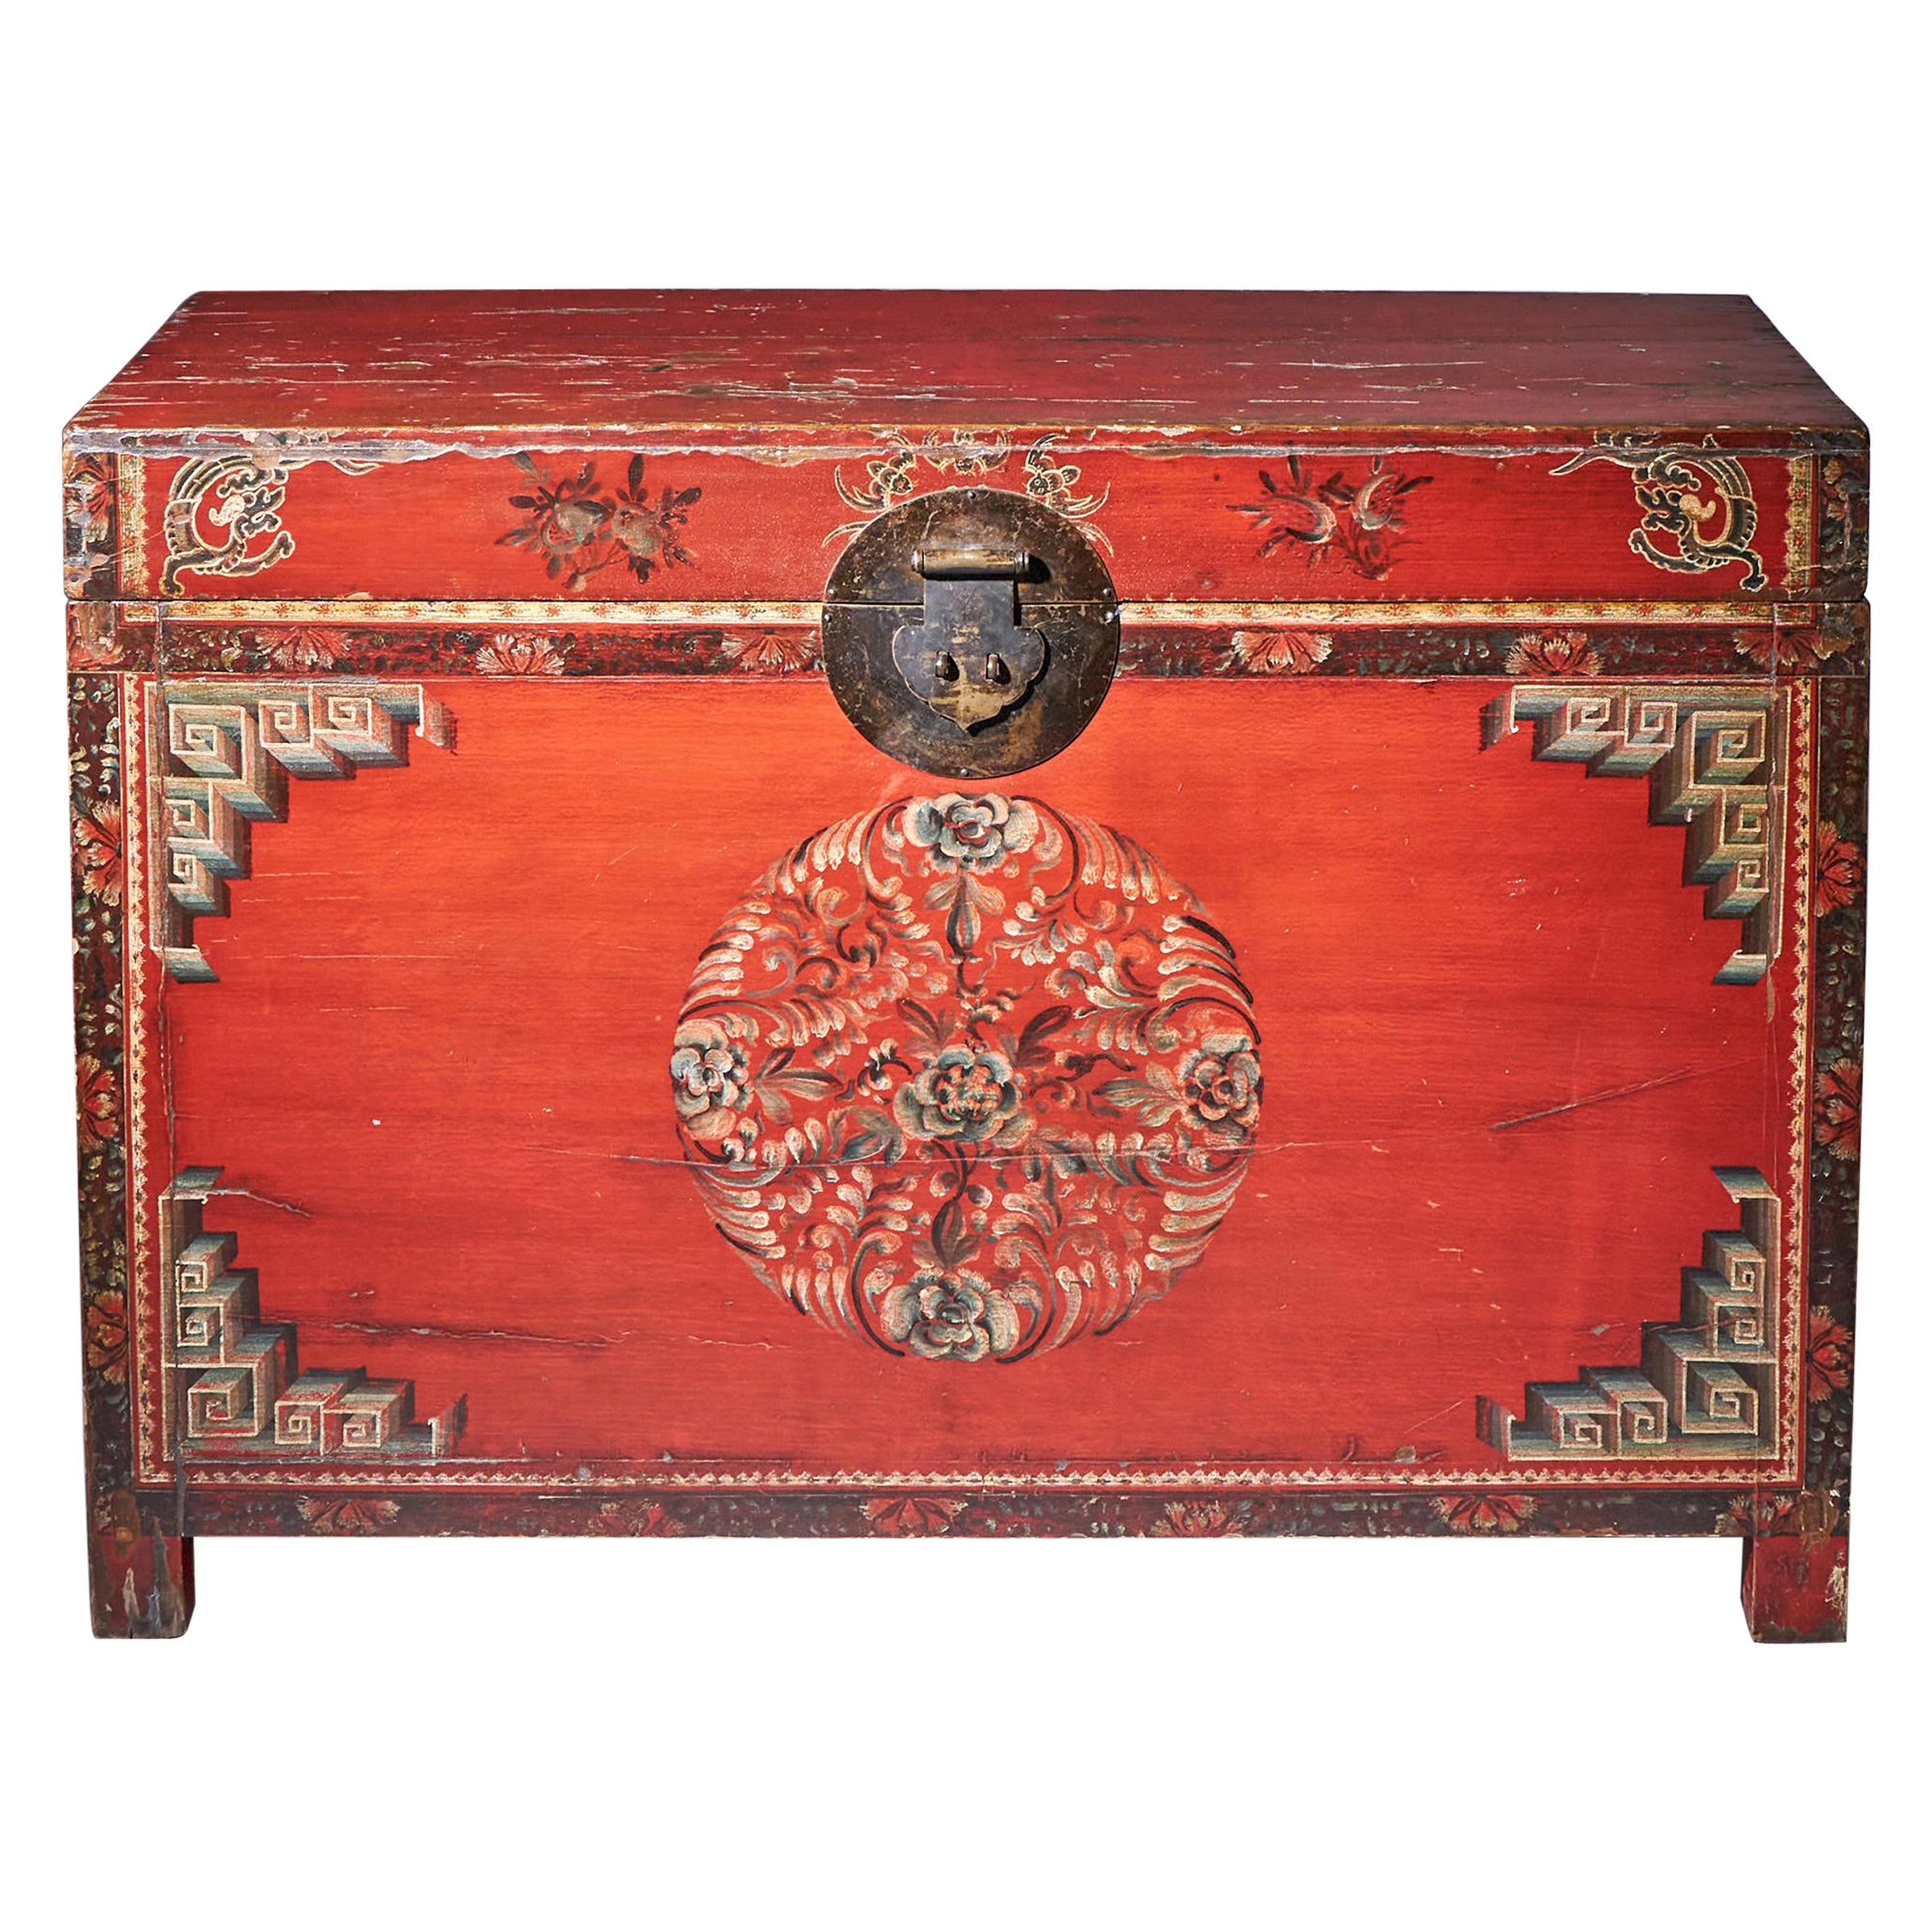 A Large 20th Century Red Japanned and Hand Decorated Tibetan Storage Chest For Sale